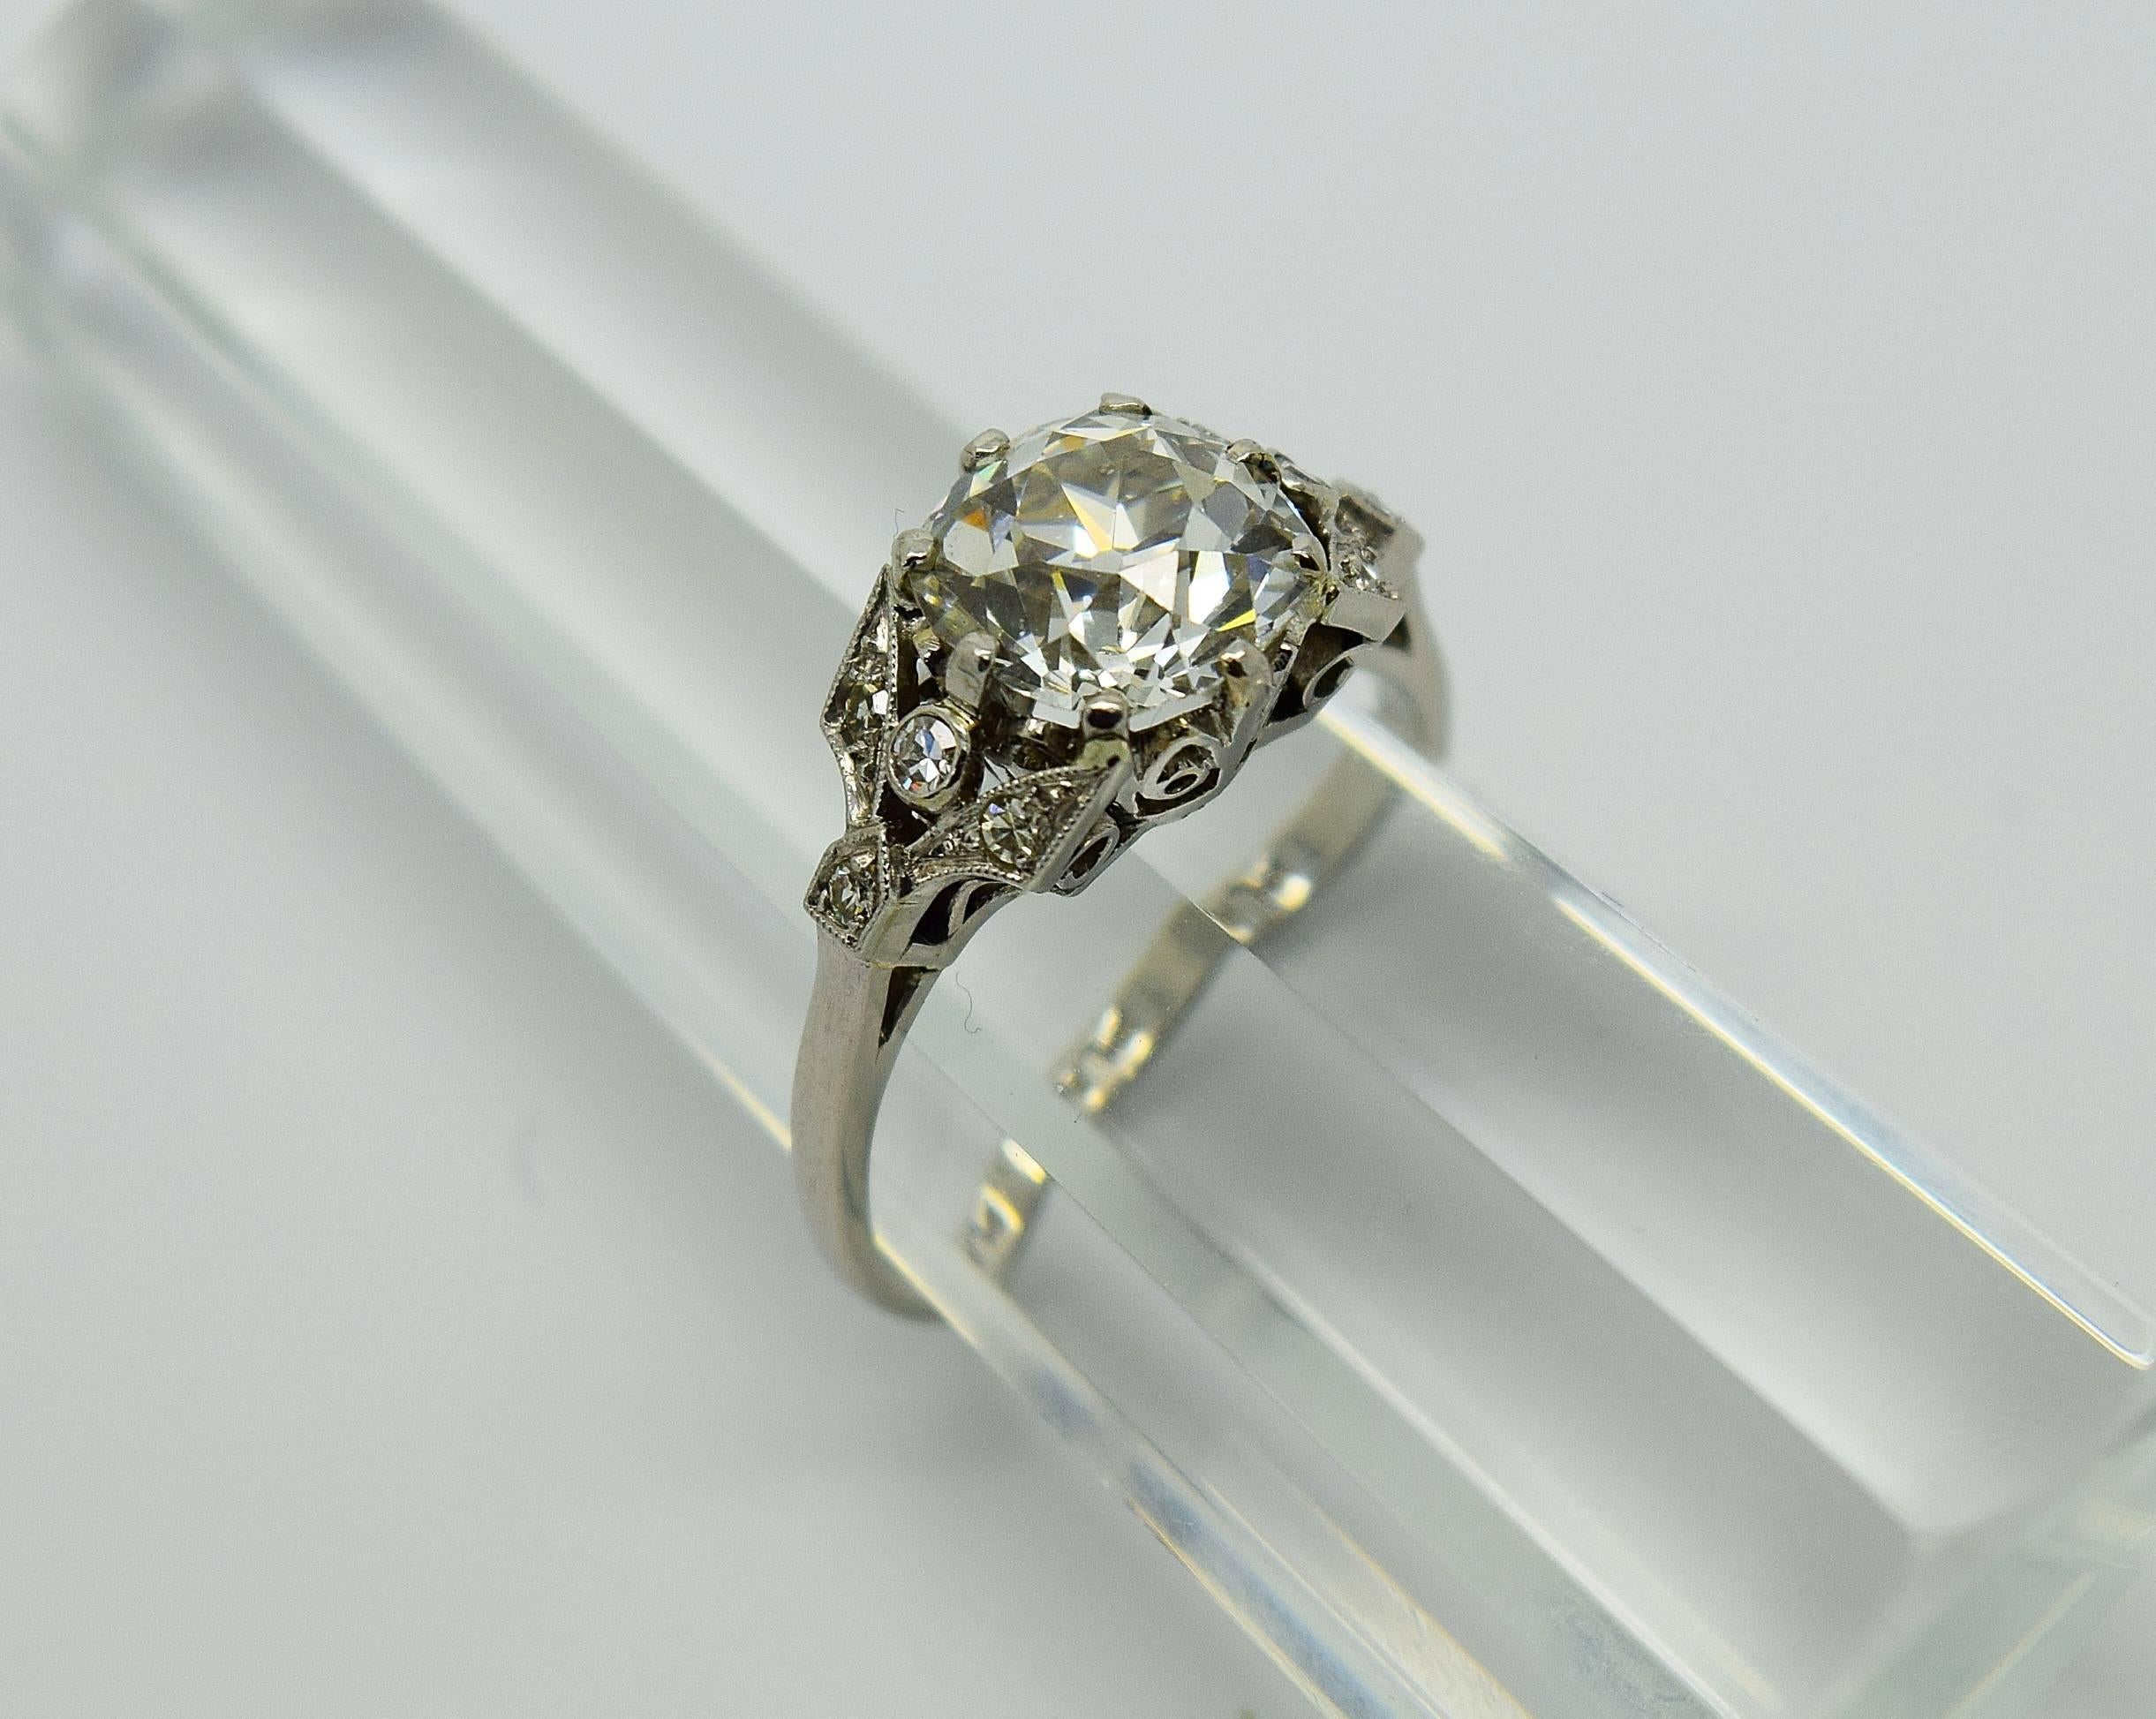 Gorgeous antique old mine brilliant cut diamond ring set in platinum. Believed to be Edwardian the ring is centered by an approximate 2.25 carat Old Mine cut diamond that is approximately H-I in color and VS1 in clarity. The ring also features 8